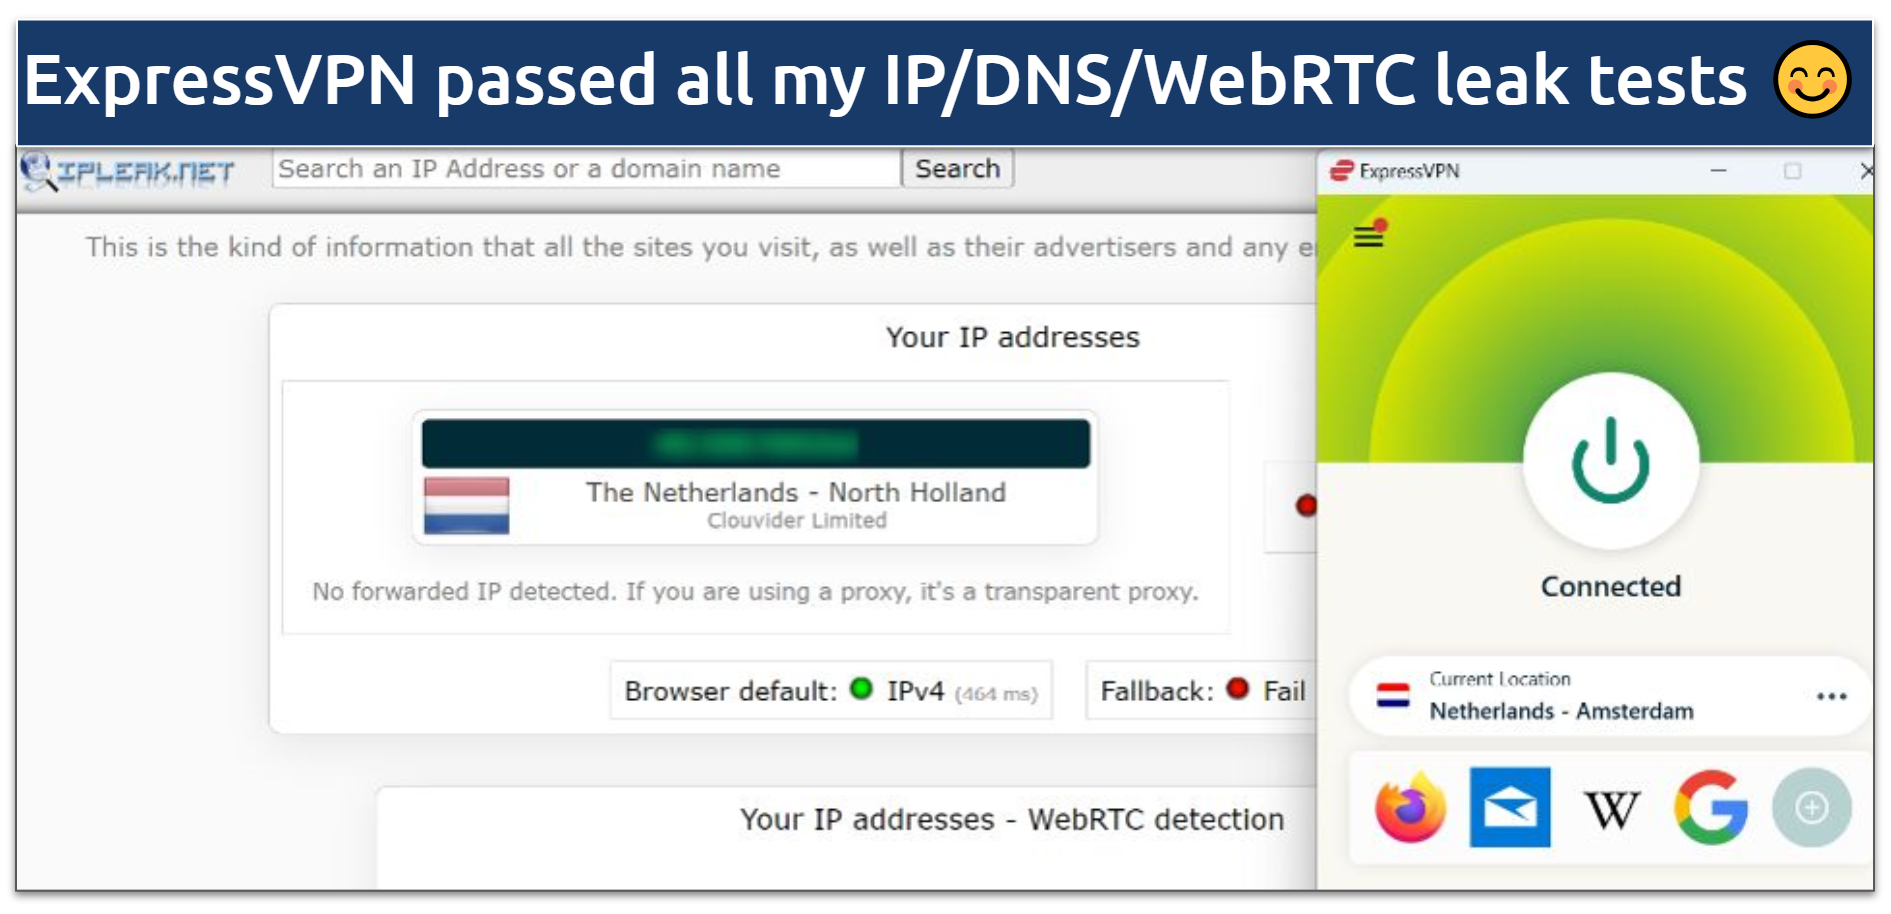 A screenshot of a successful IP/DNS/WebRTC leak test while connected to ExpressVPN's Amsterdam server